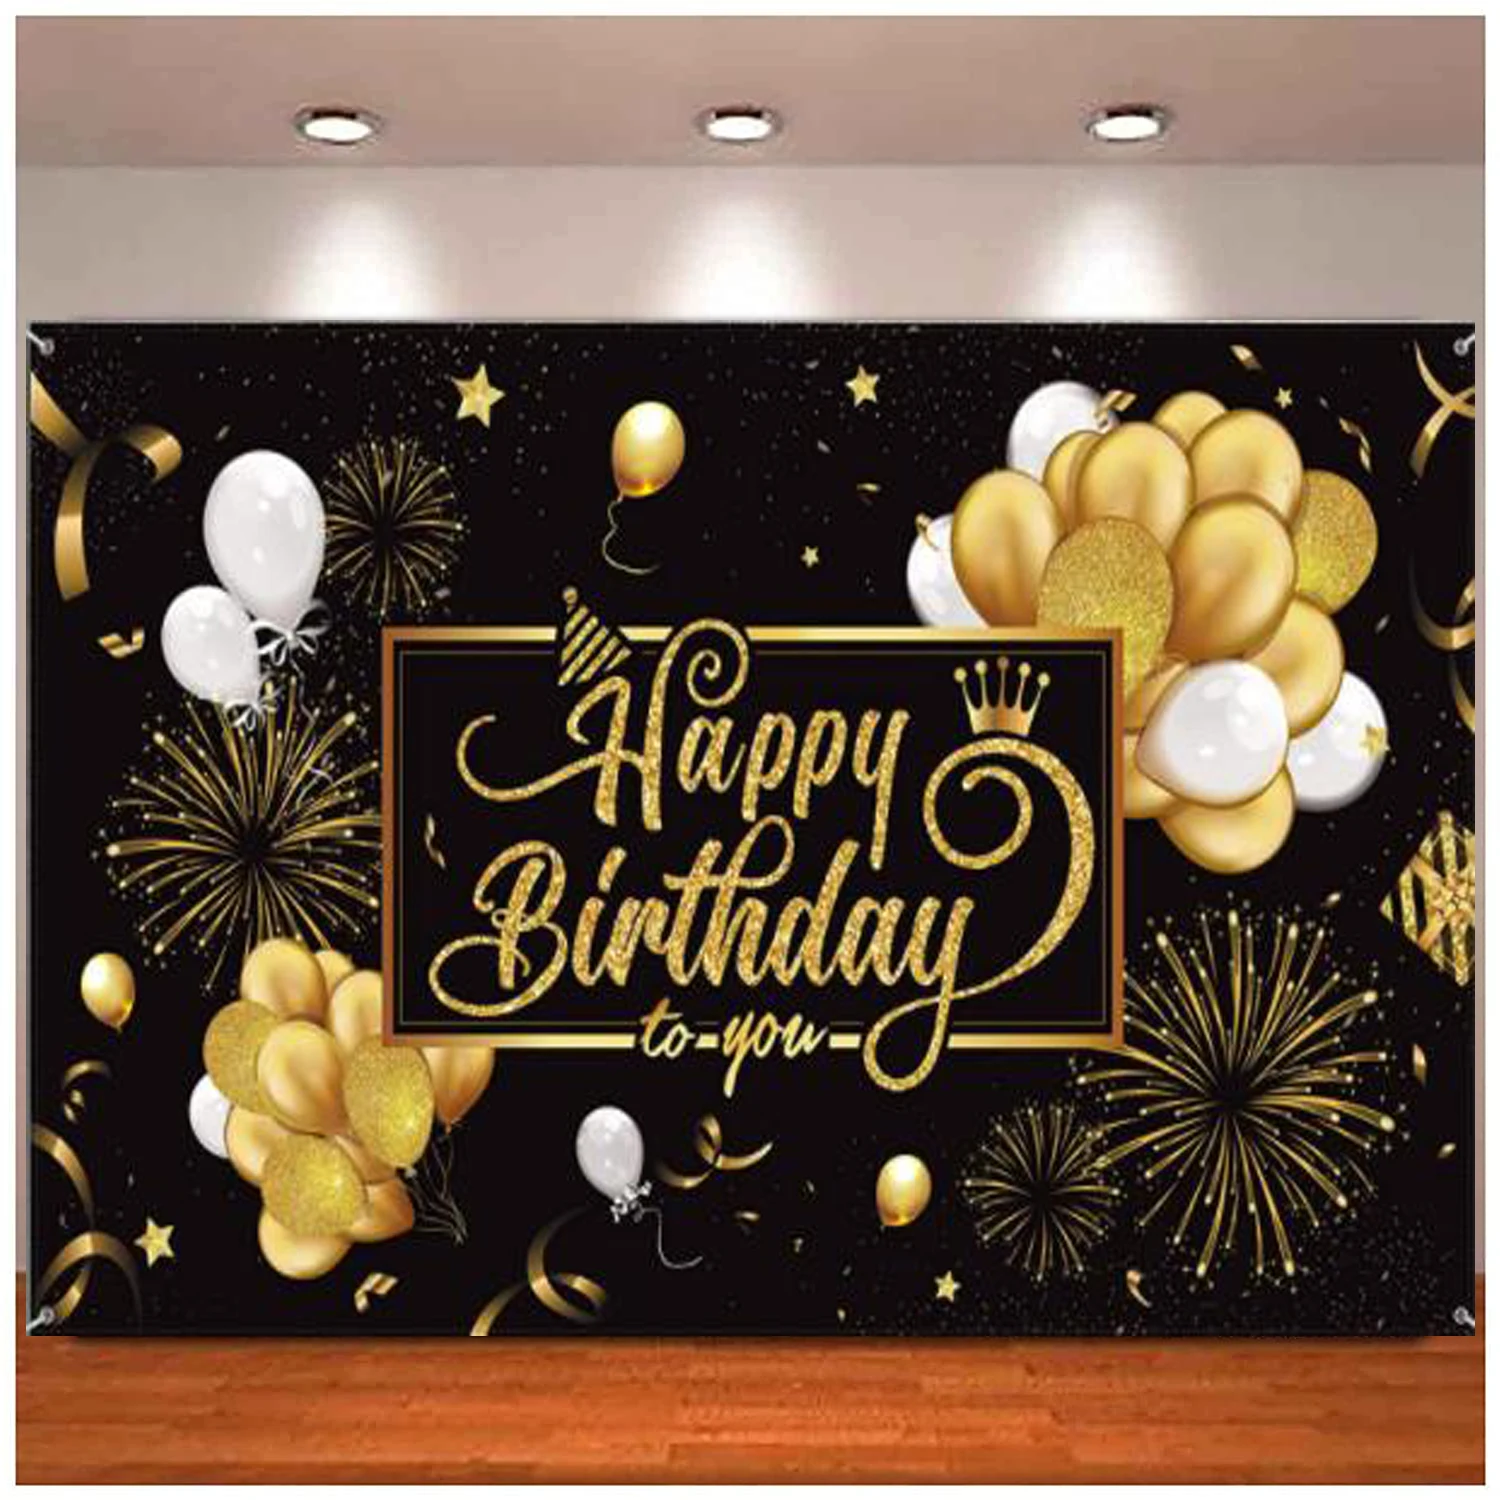 

Happy Birthday Party Backdrop Banner Black Gold Balloon Star Fireworks Poster For Men Women 30th 40th 50th 60th 70th 80th Decor